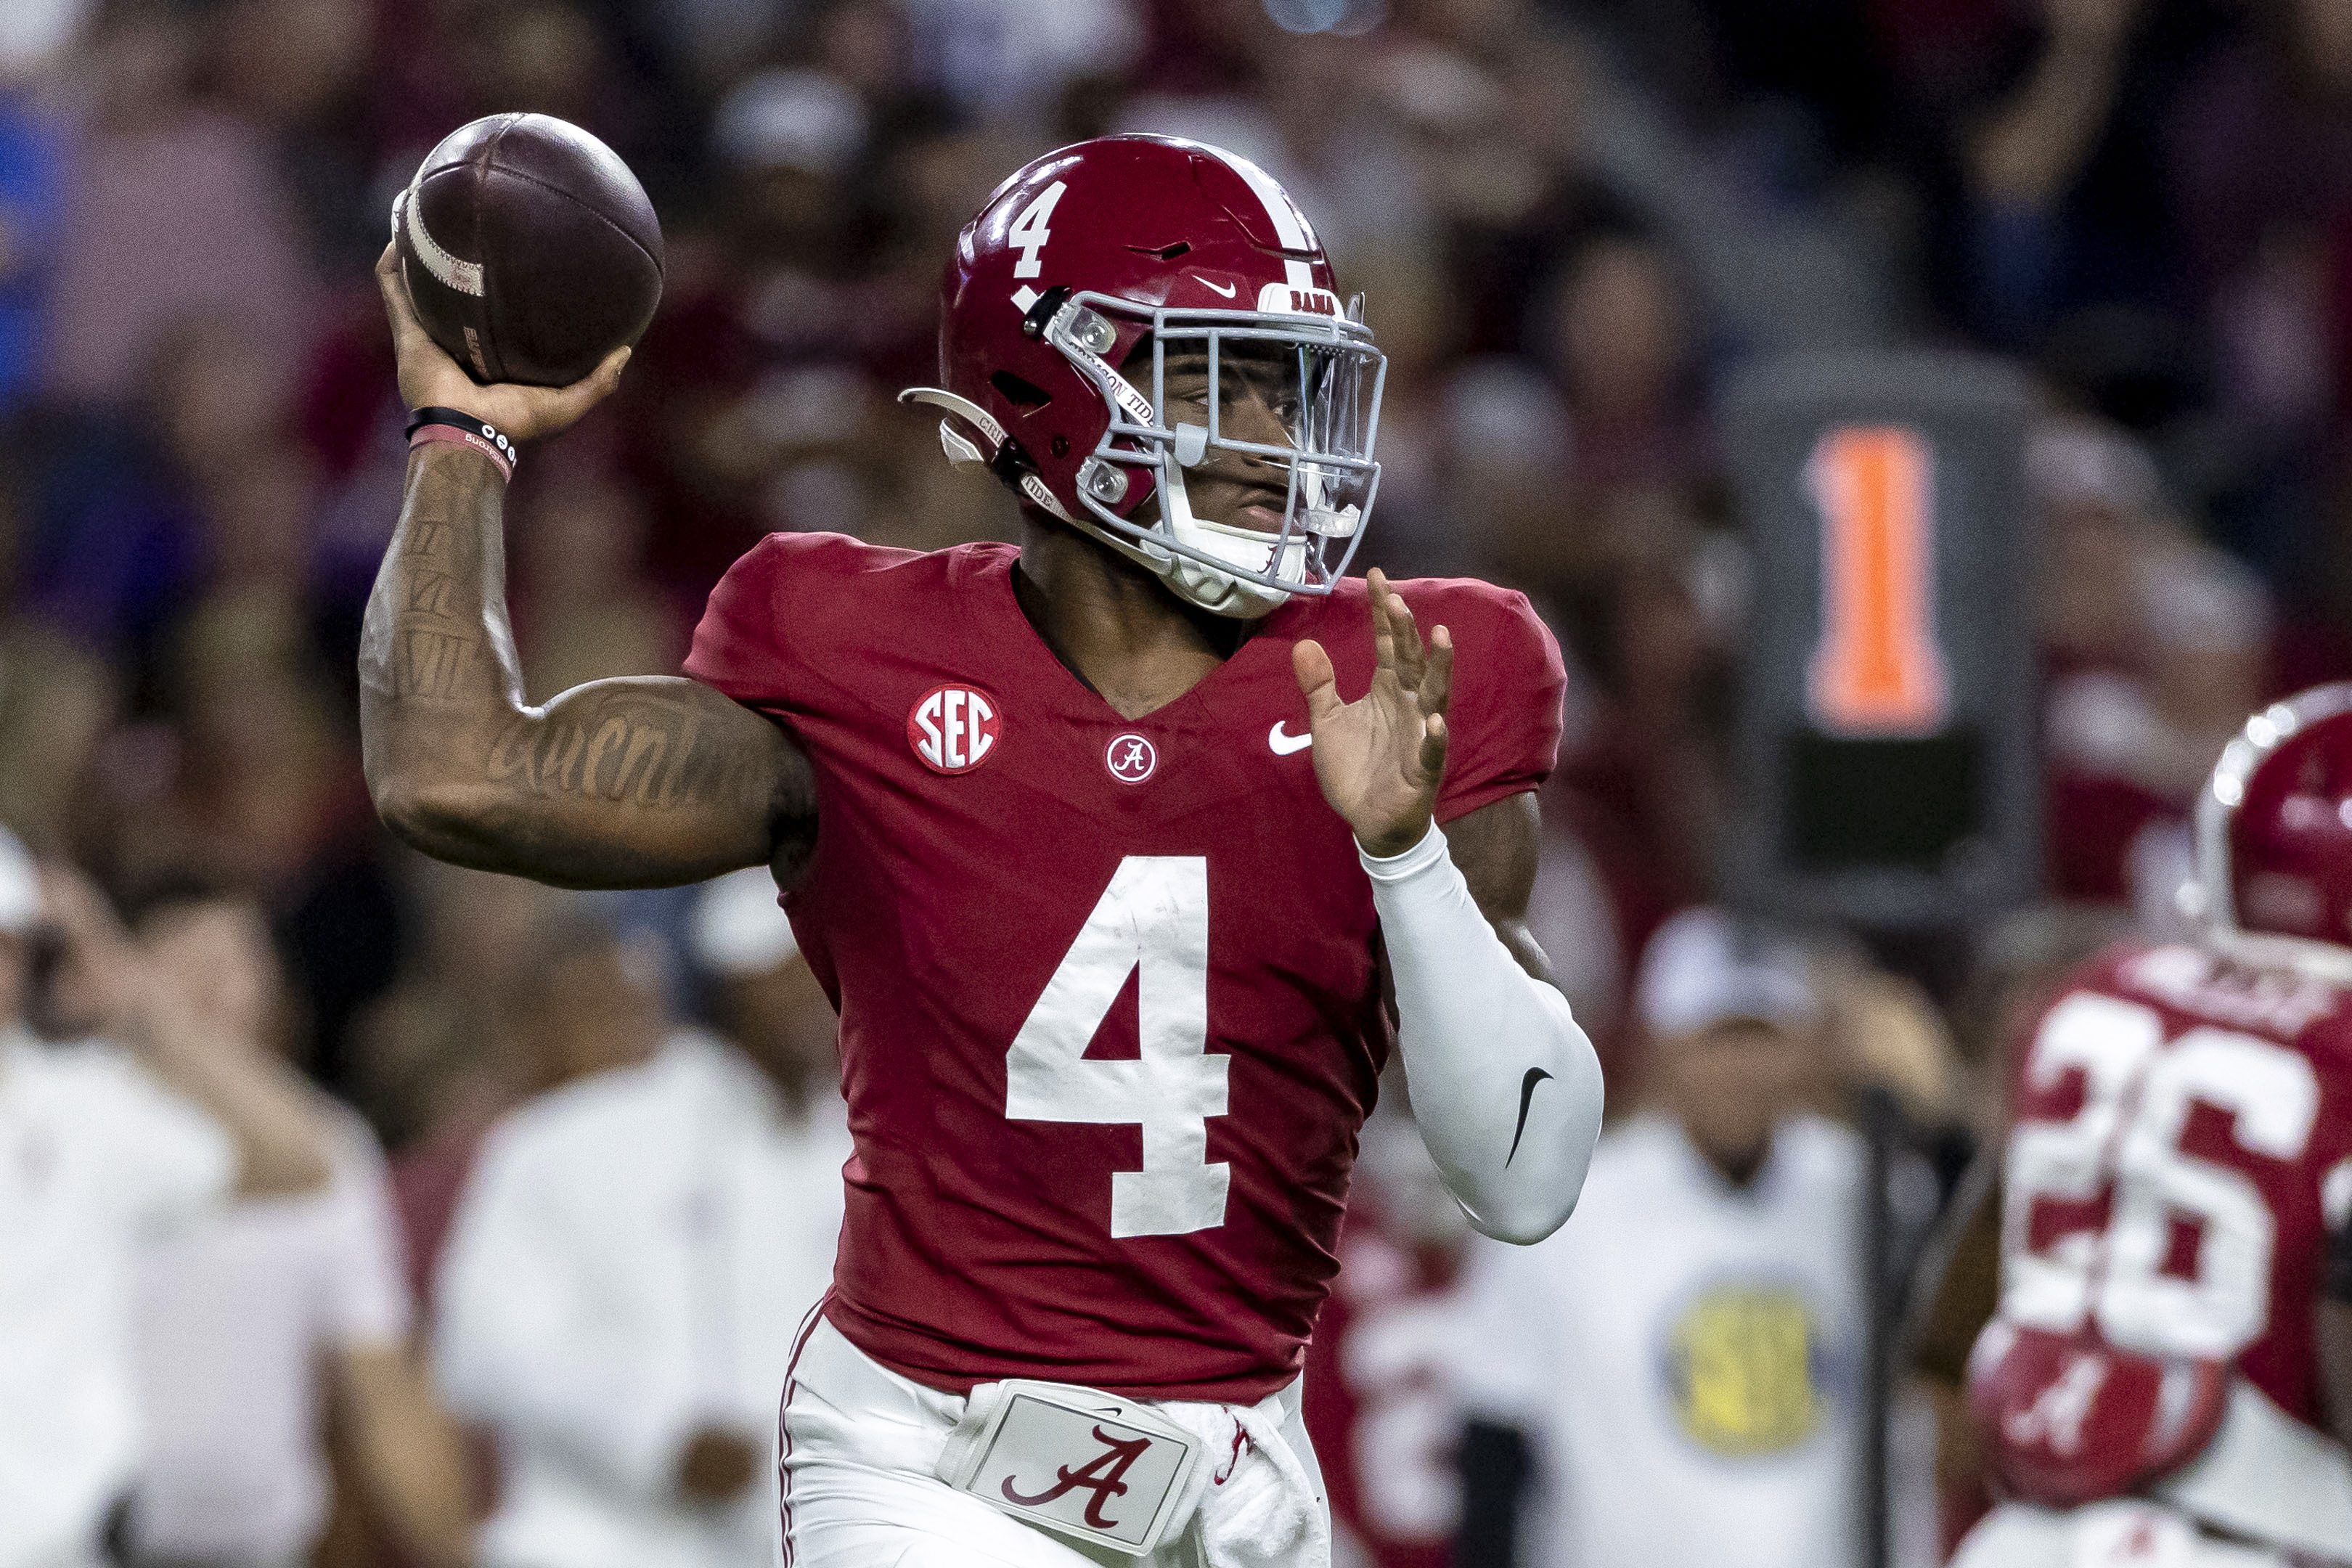 Alabama at Auburn live stream (2/11): How to watch online, TV